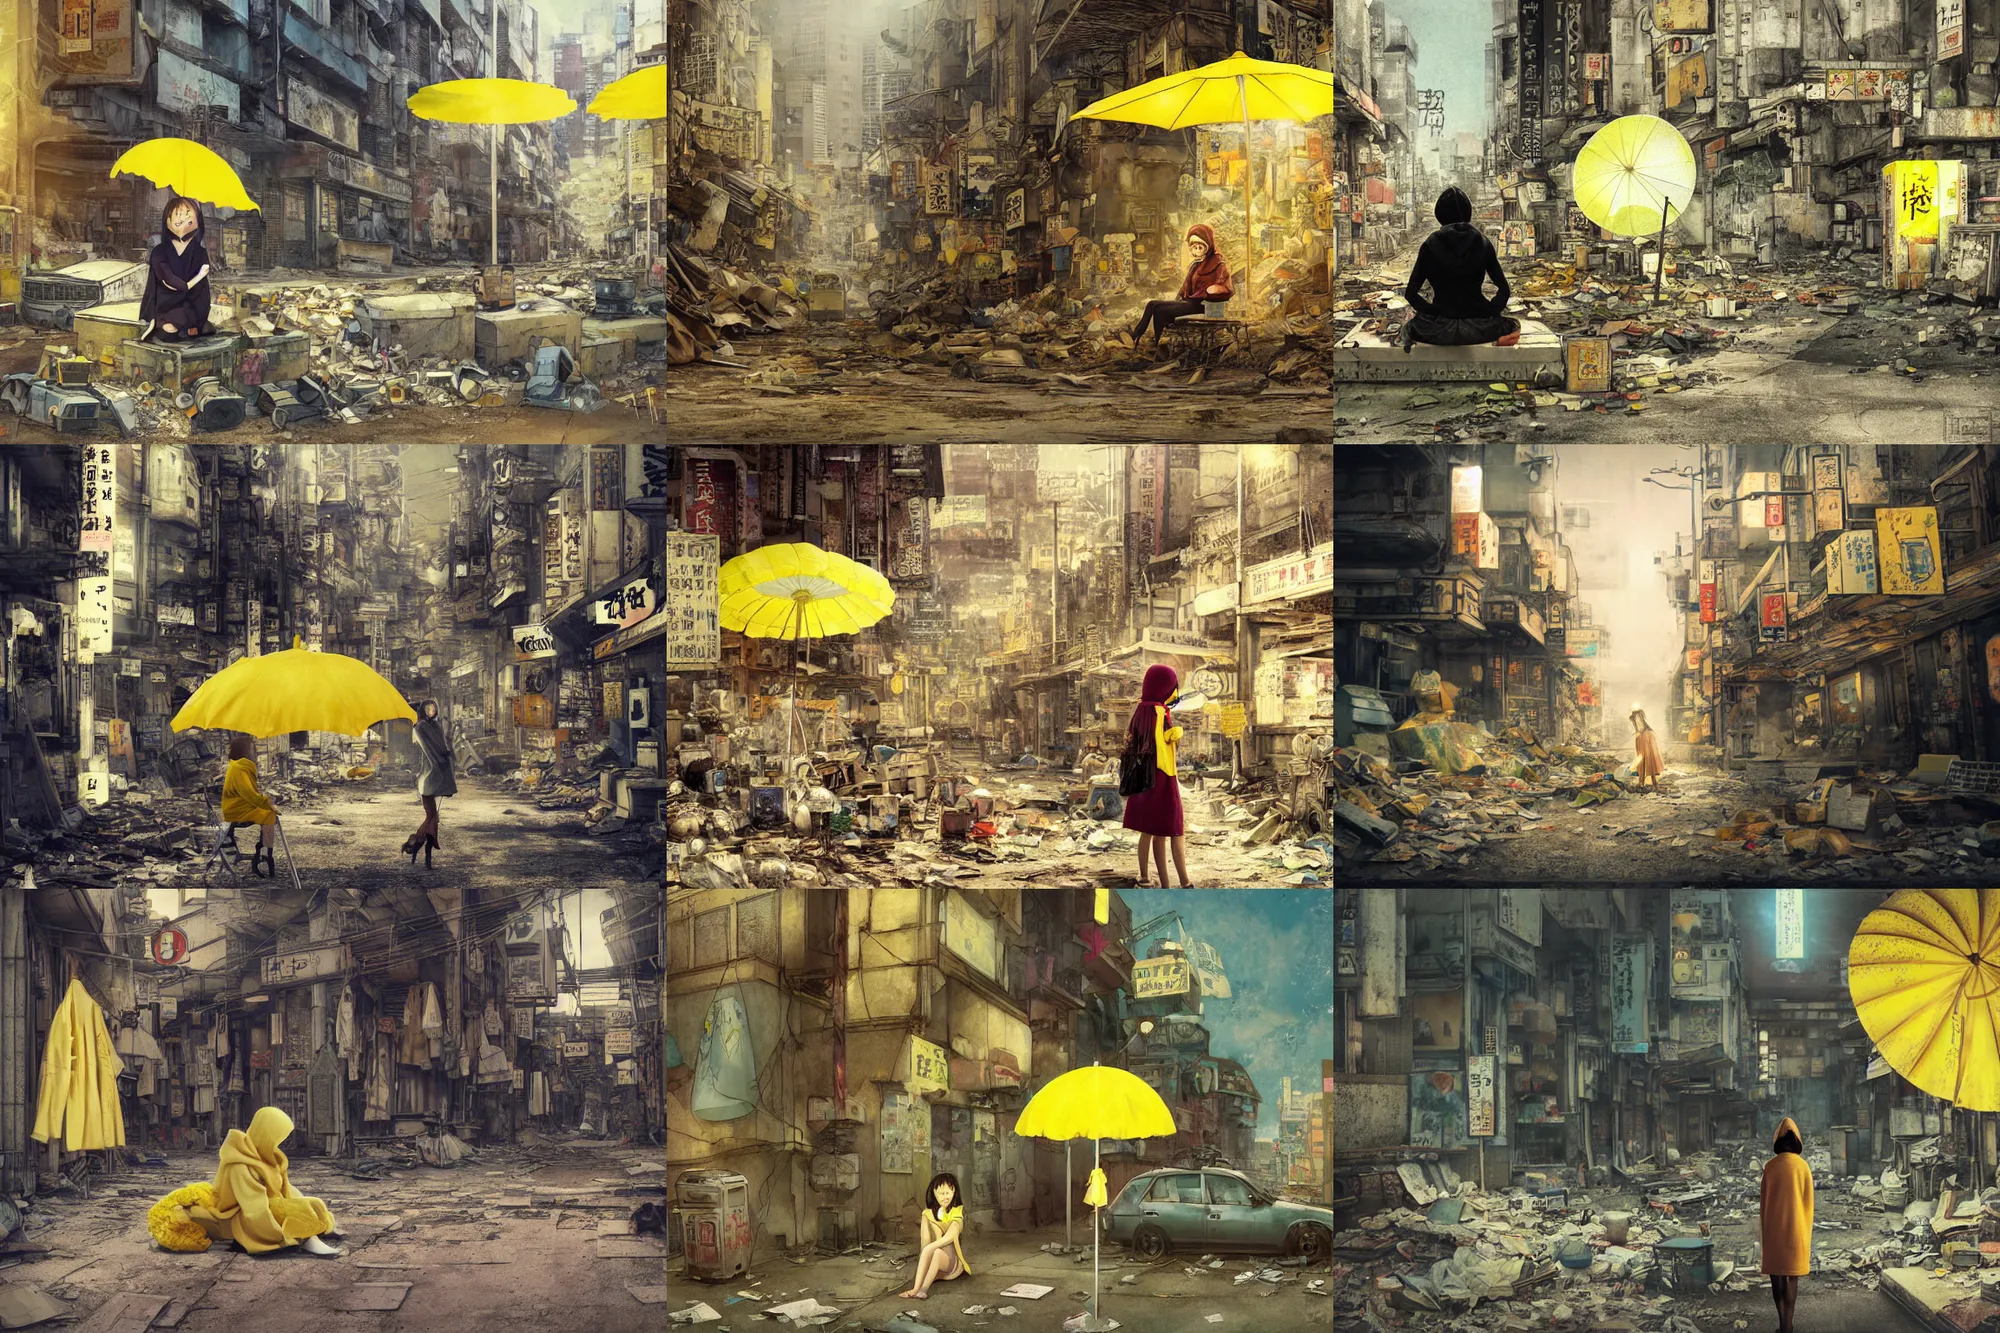 Prompt: tatsuyuki tanaka artwork, soft bloom lighting, abandoned city, paper texture, movie scene, distant shot of hoody girl sitting under a yellow parasol in deserted dusty shinjuku junk town, old pawn shop, bright ground, lurking robot monster in background